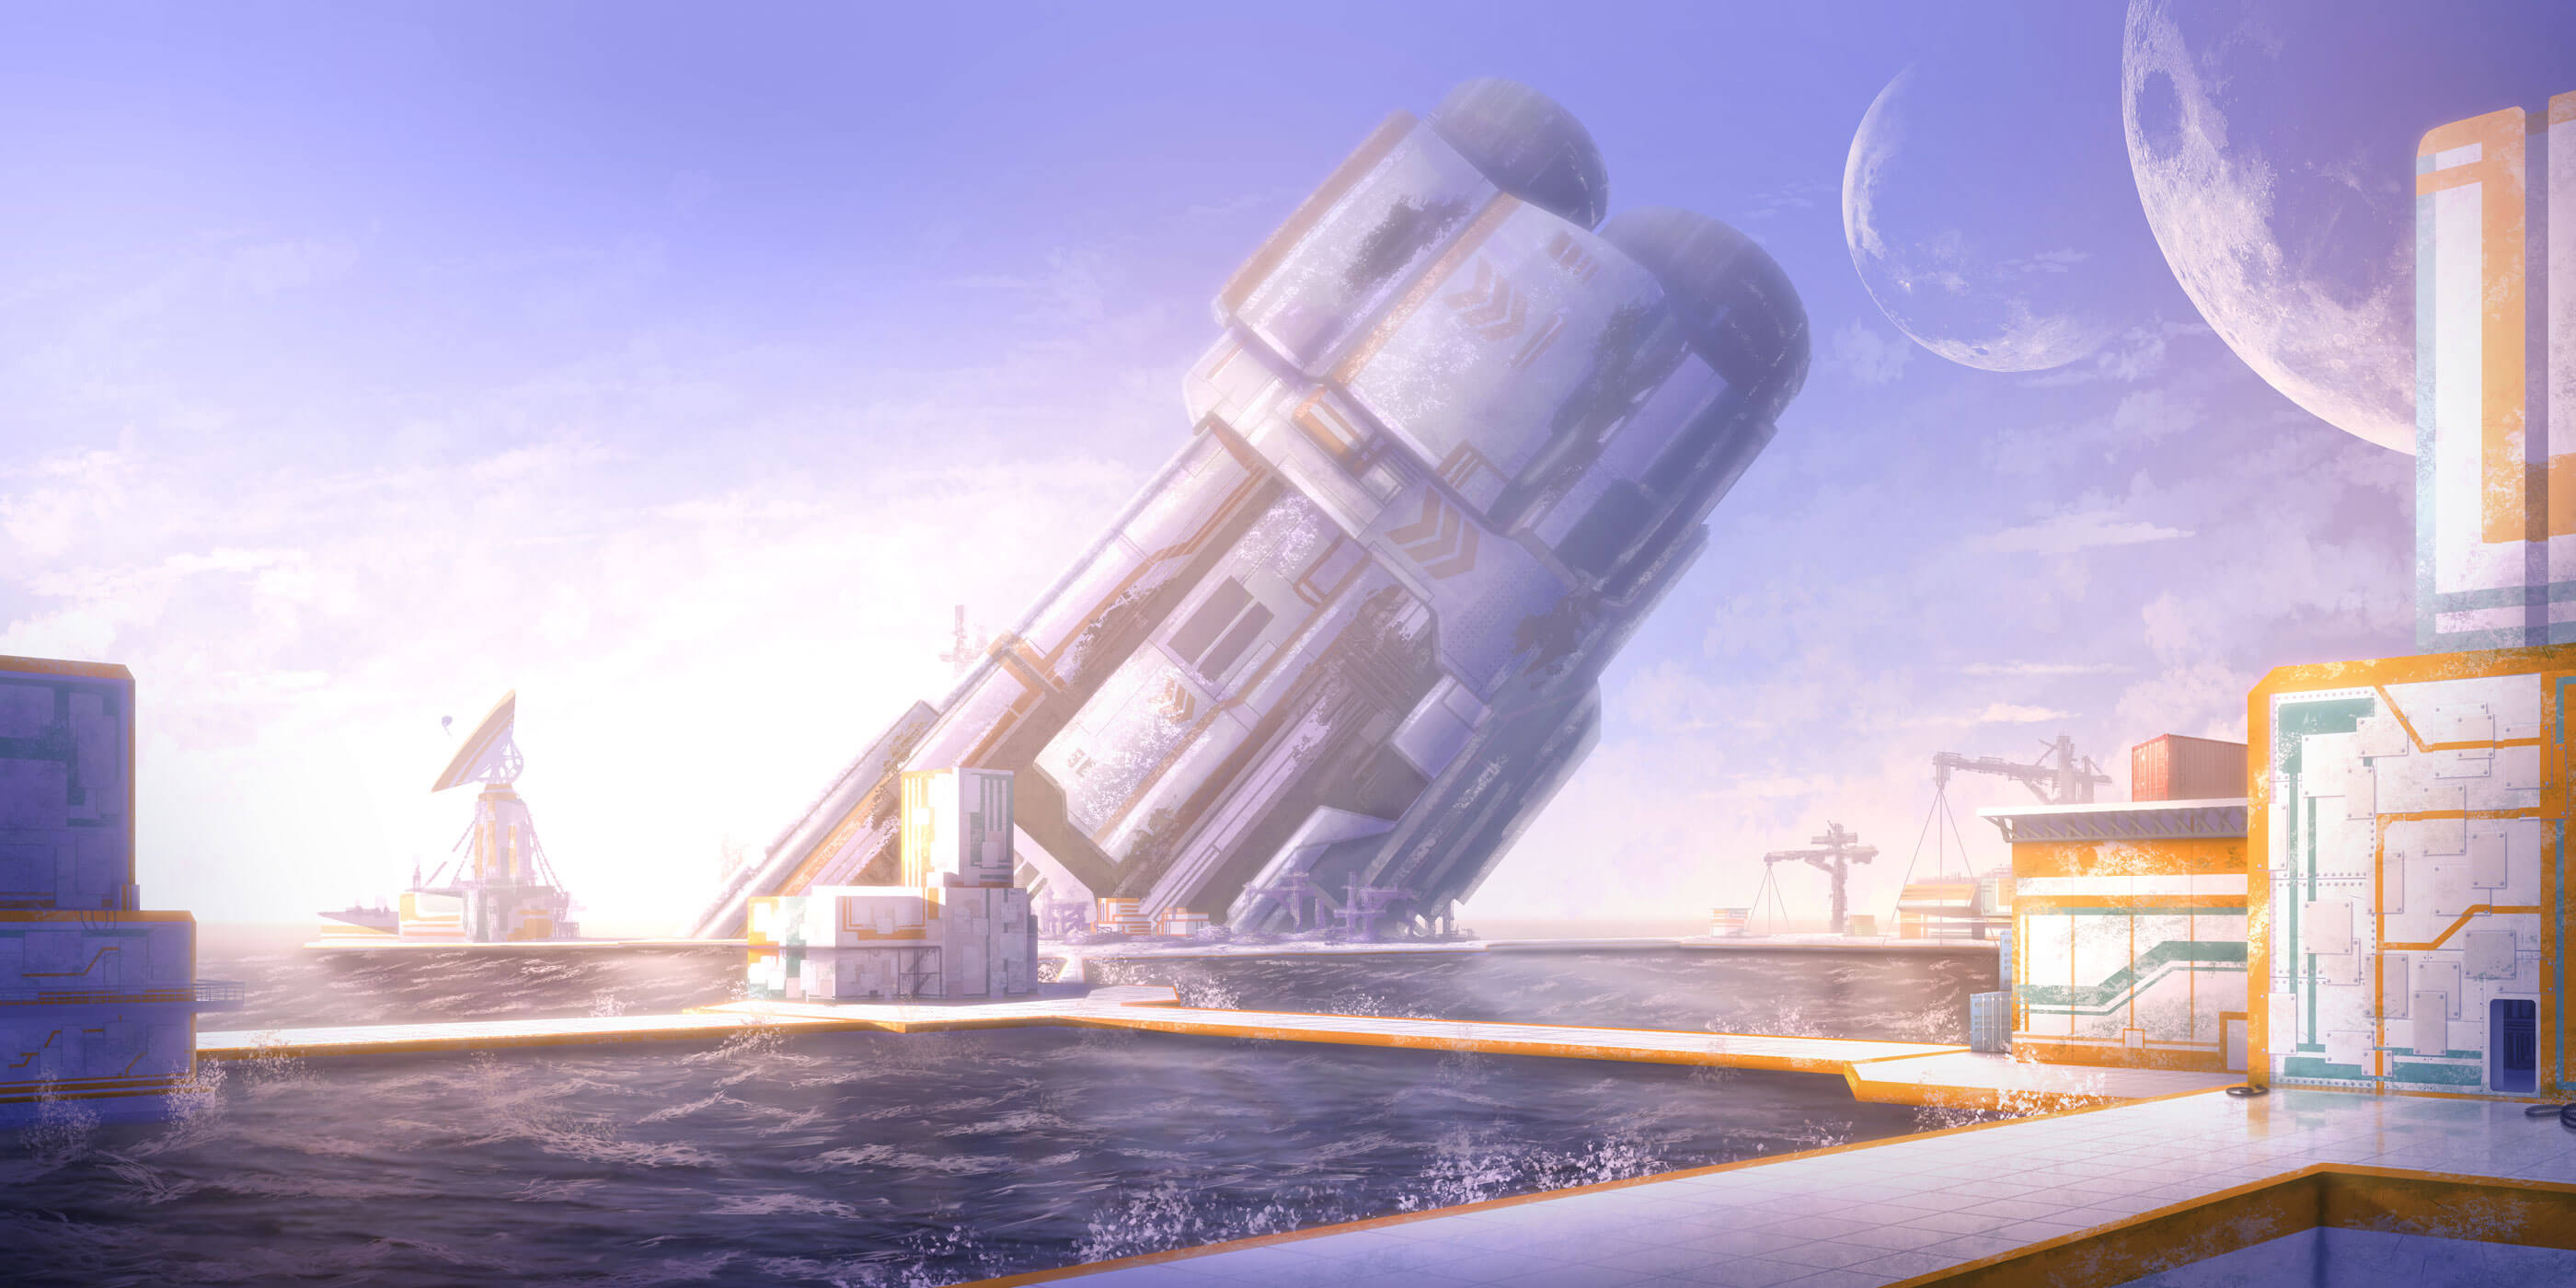 Futuristic industrial buildings under two daylit moons.